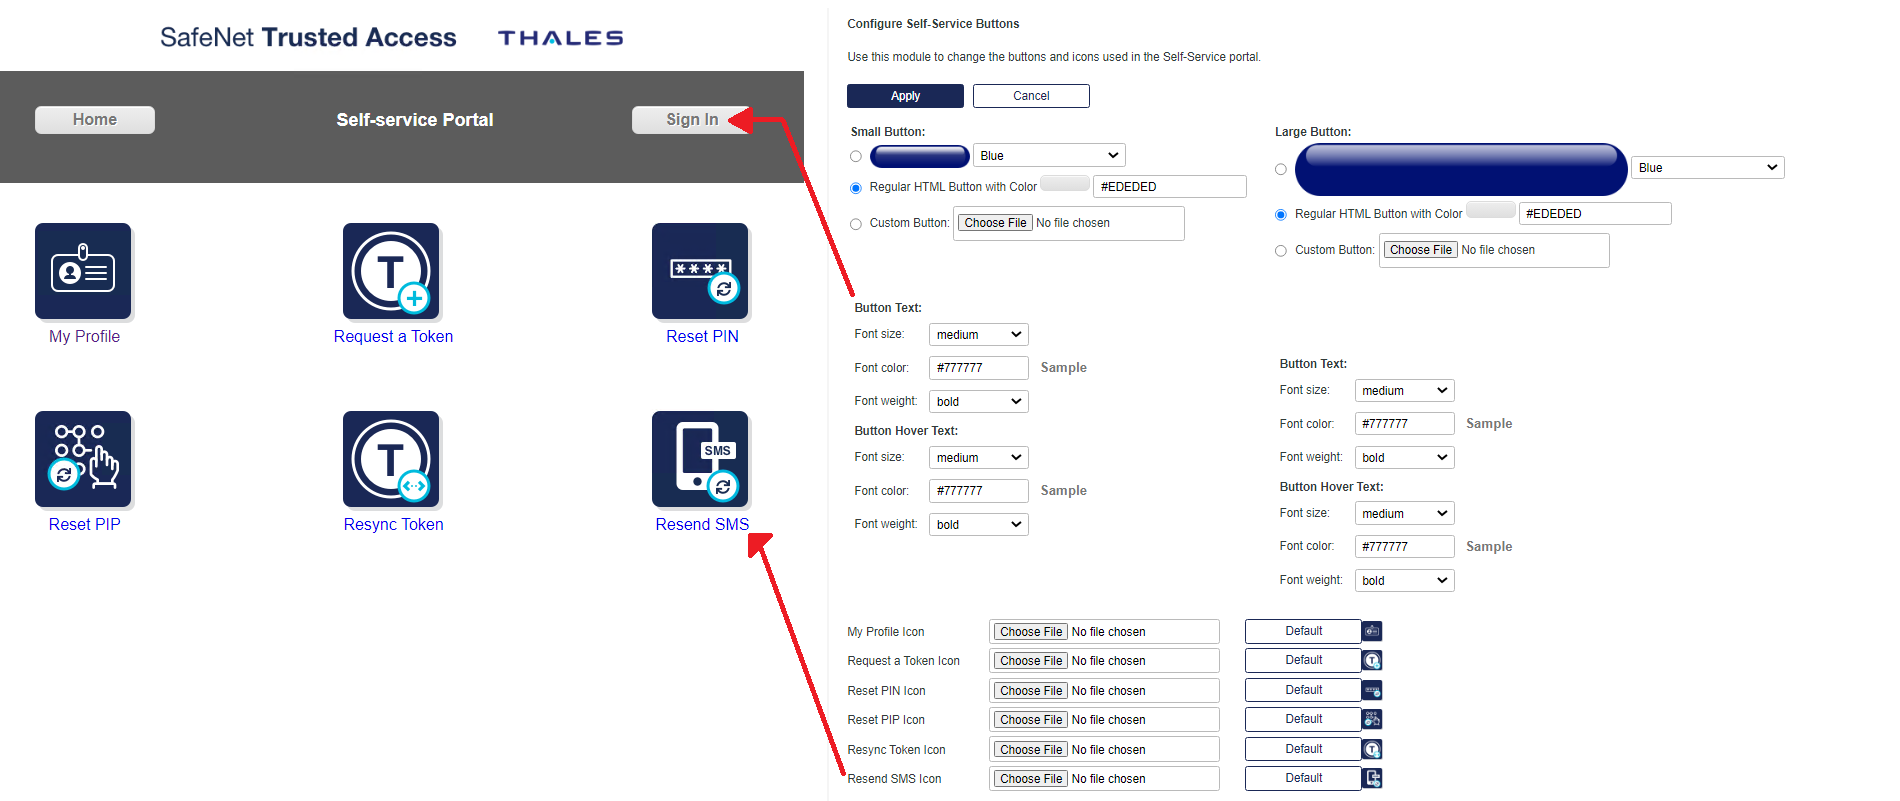 Thales SafeNet Plus Service Plan - Extended Service Agreement - 1 Year -  020-160001-002-000 - Encryption 